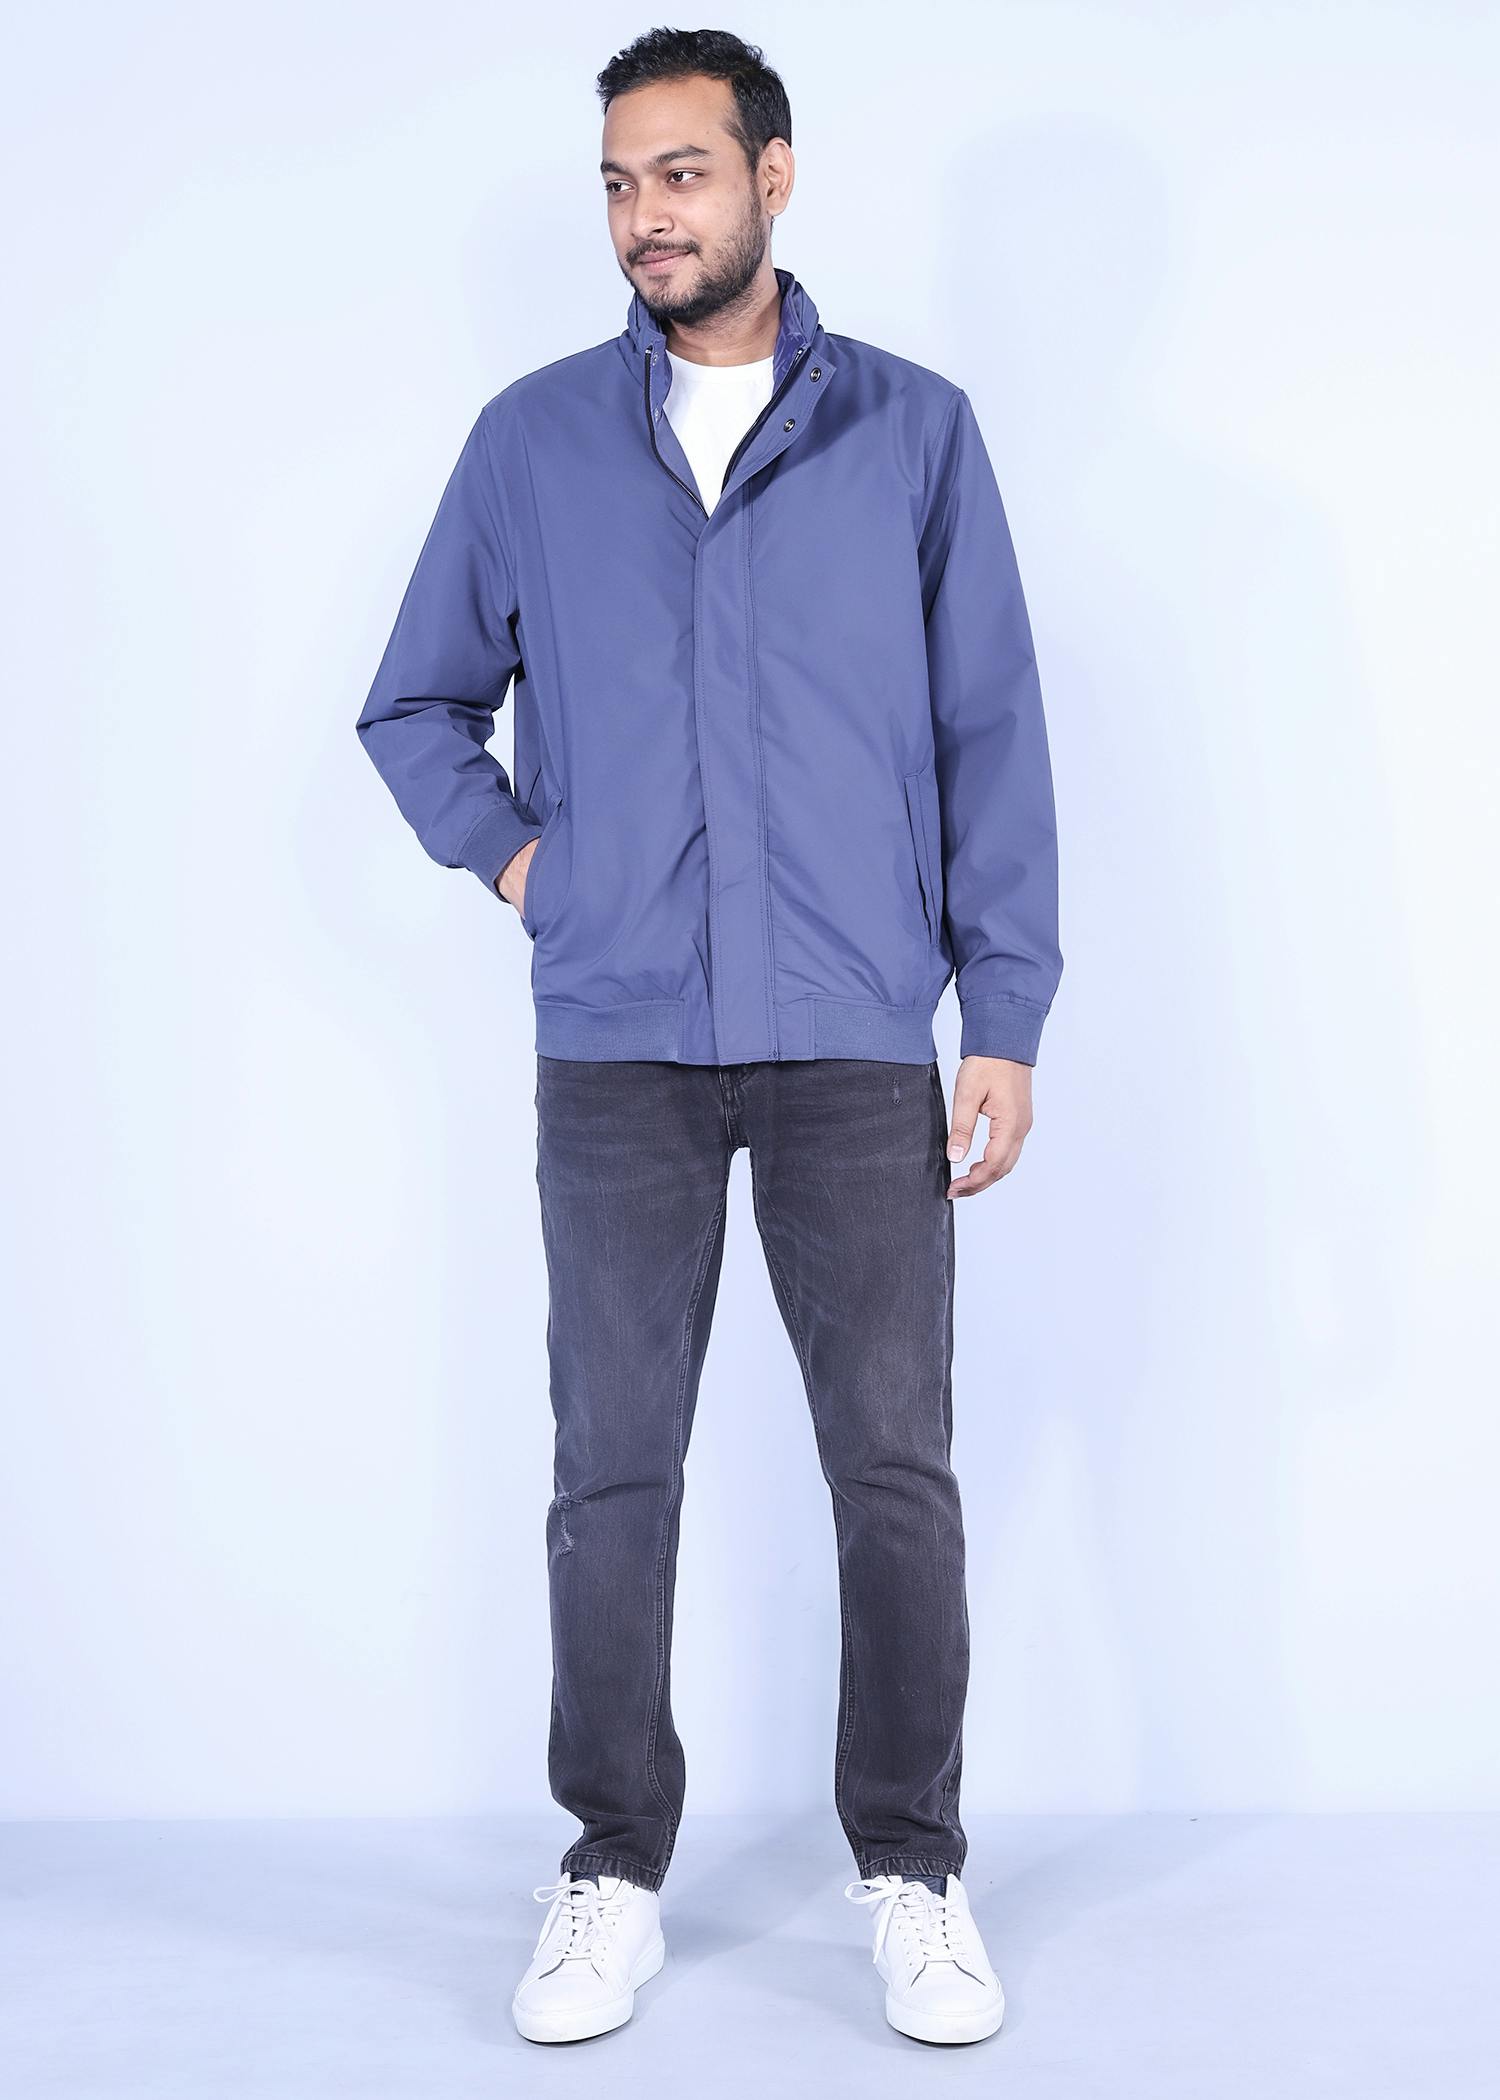 minla jacket navy color full front view